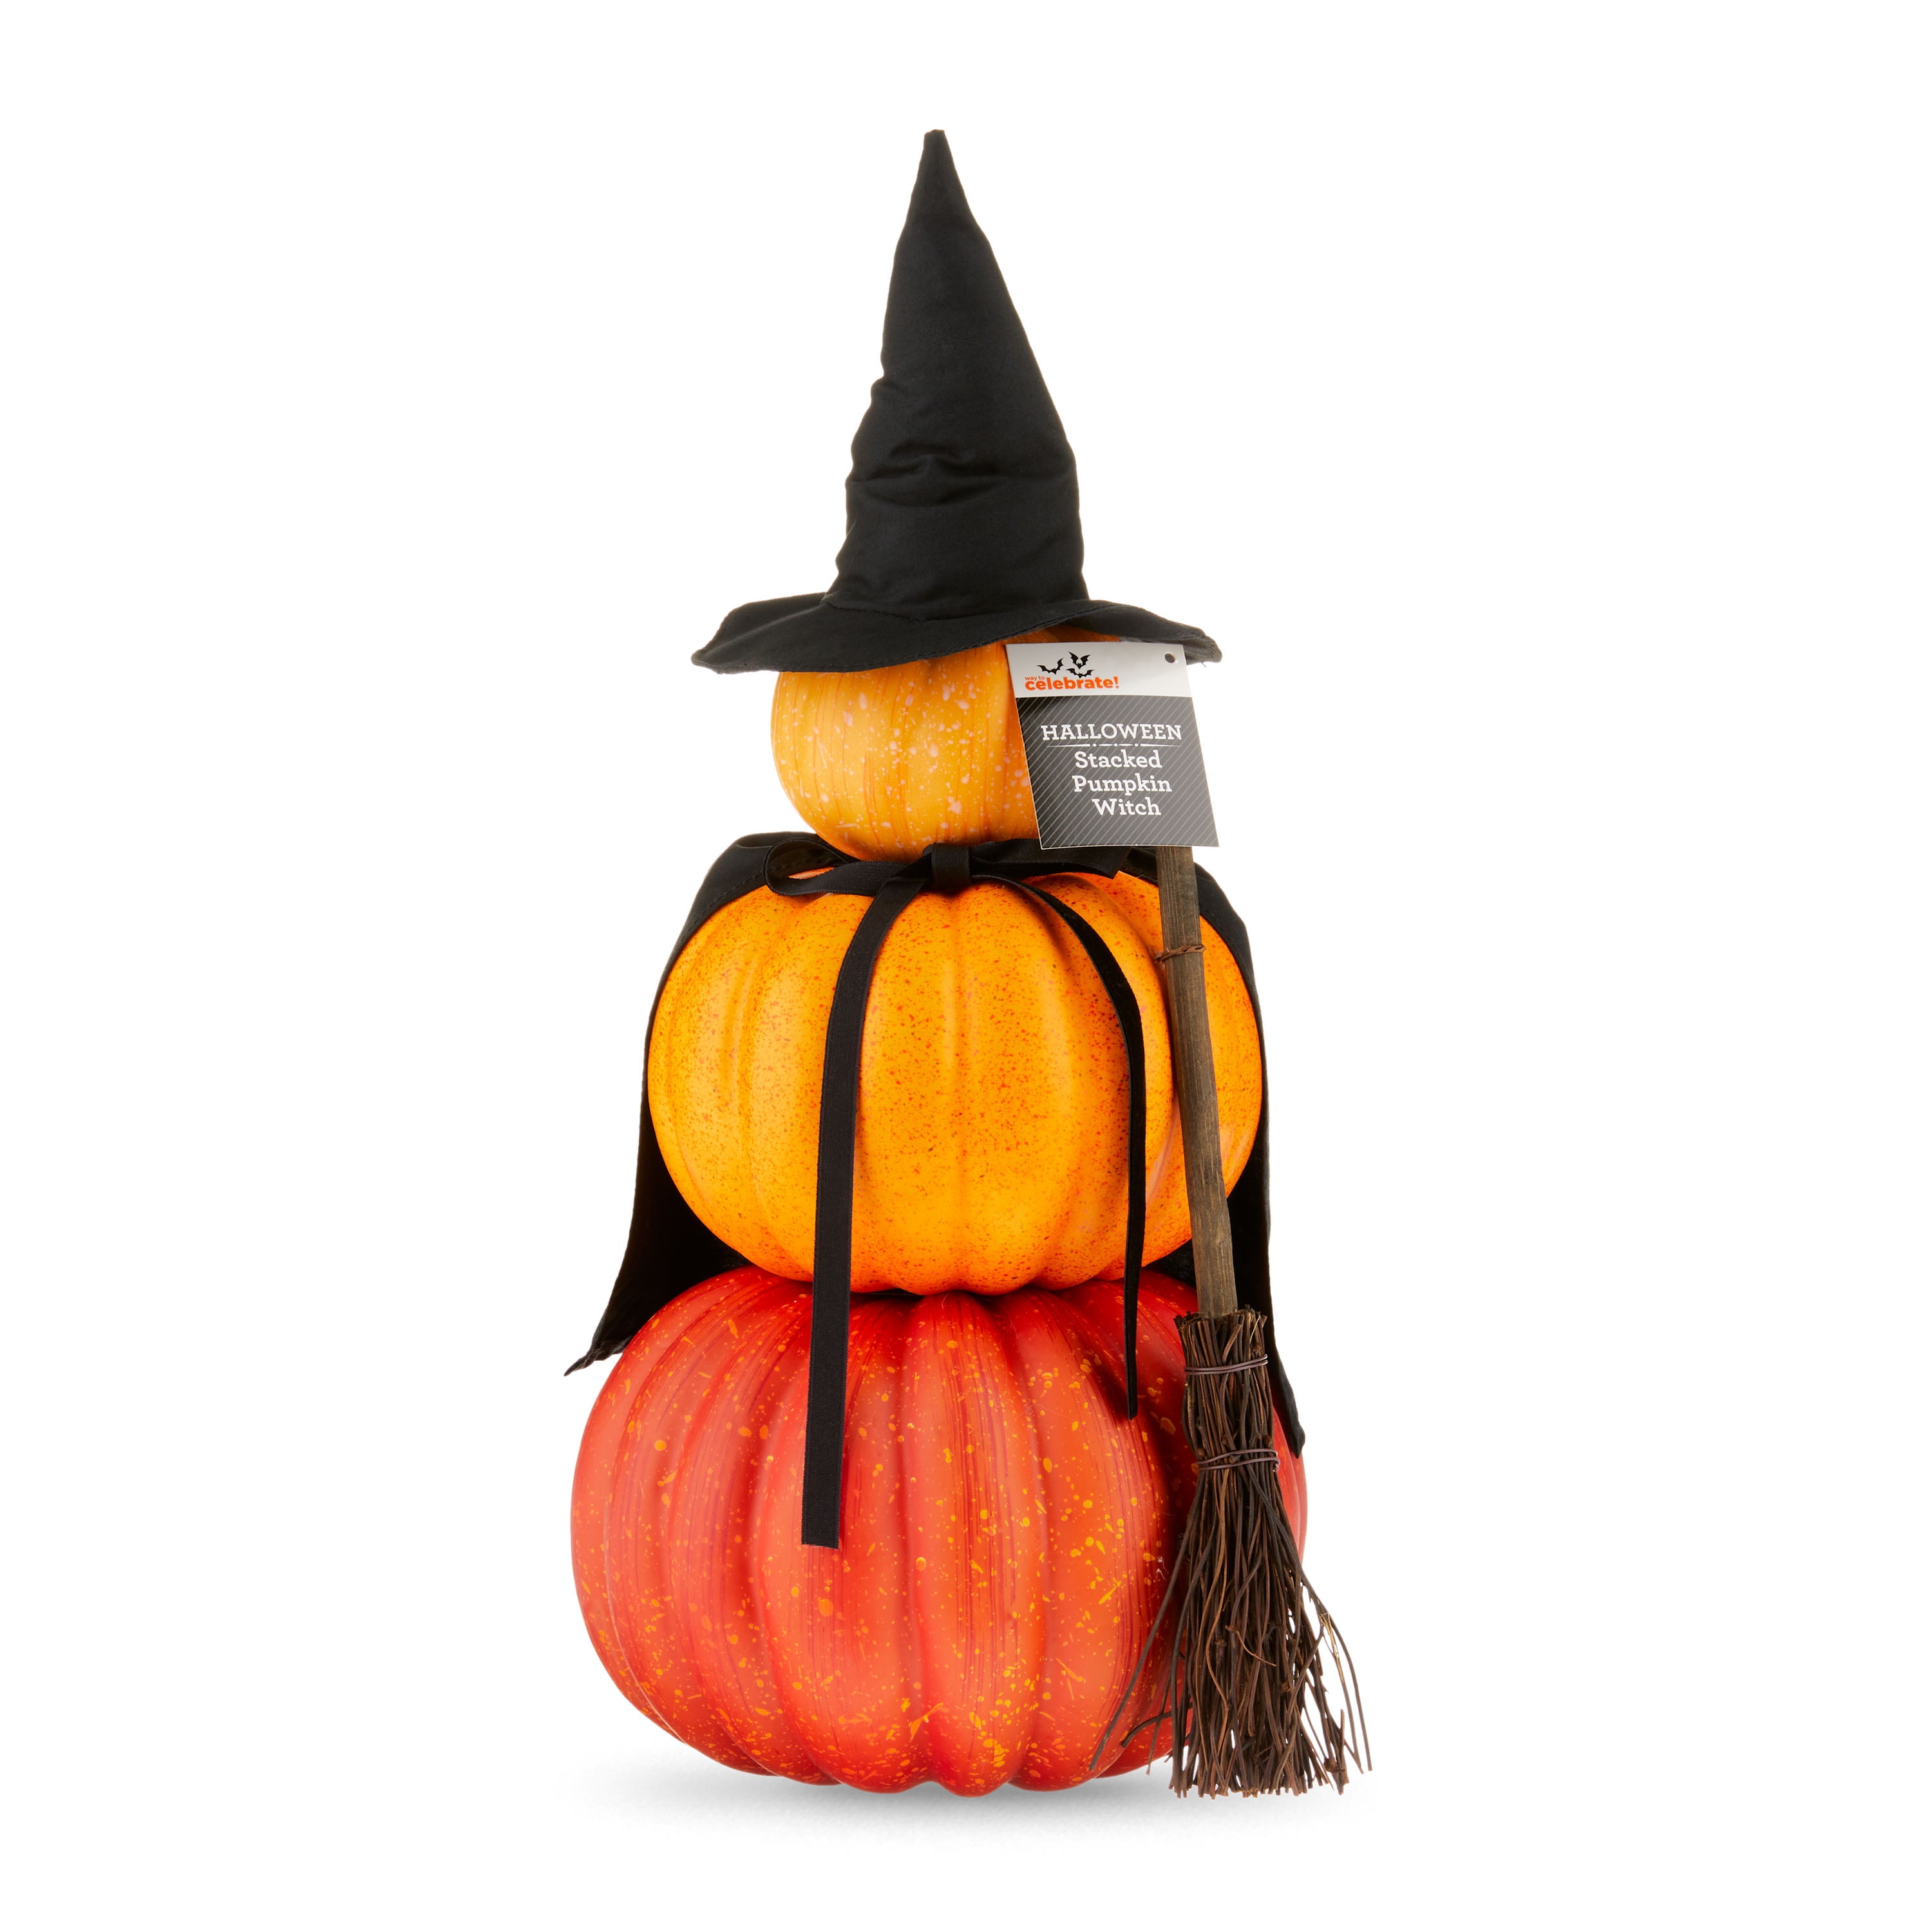 Witch's Pumpkin (Airdrop) - 🔥🔥 Check full Collection for other